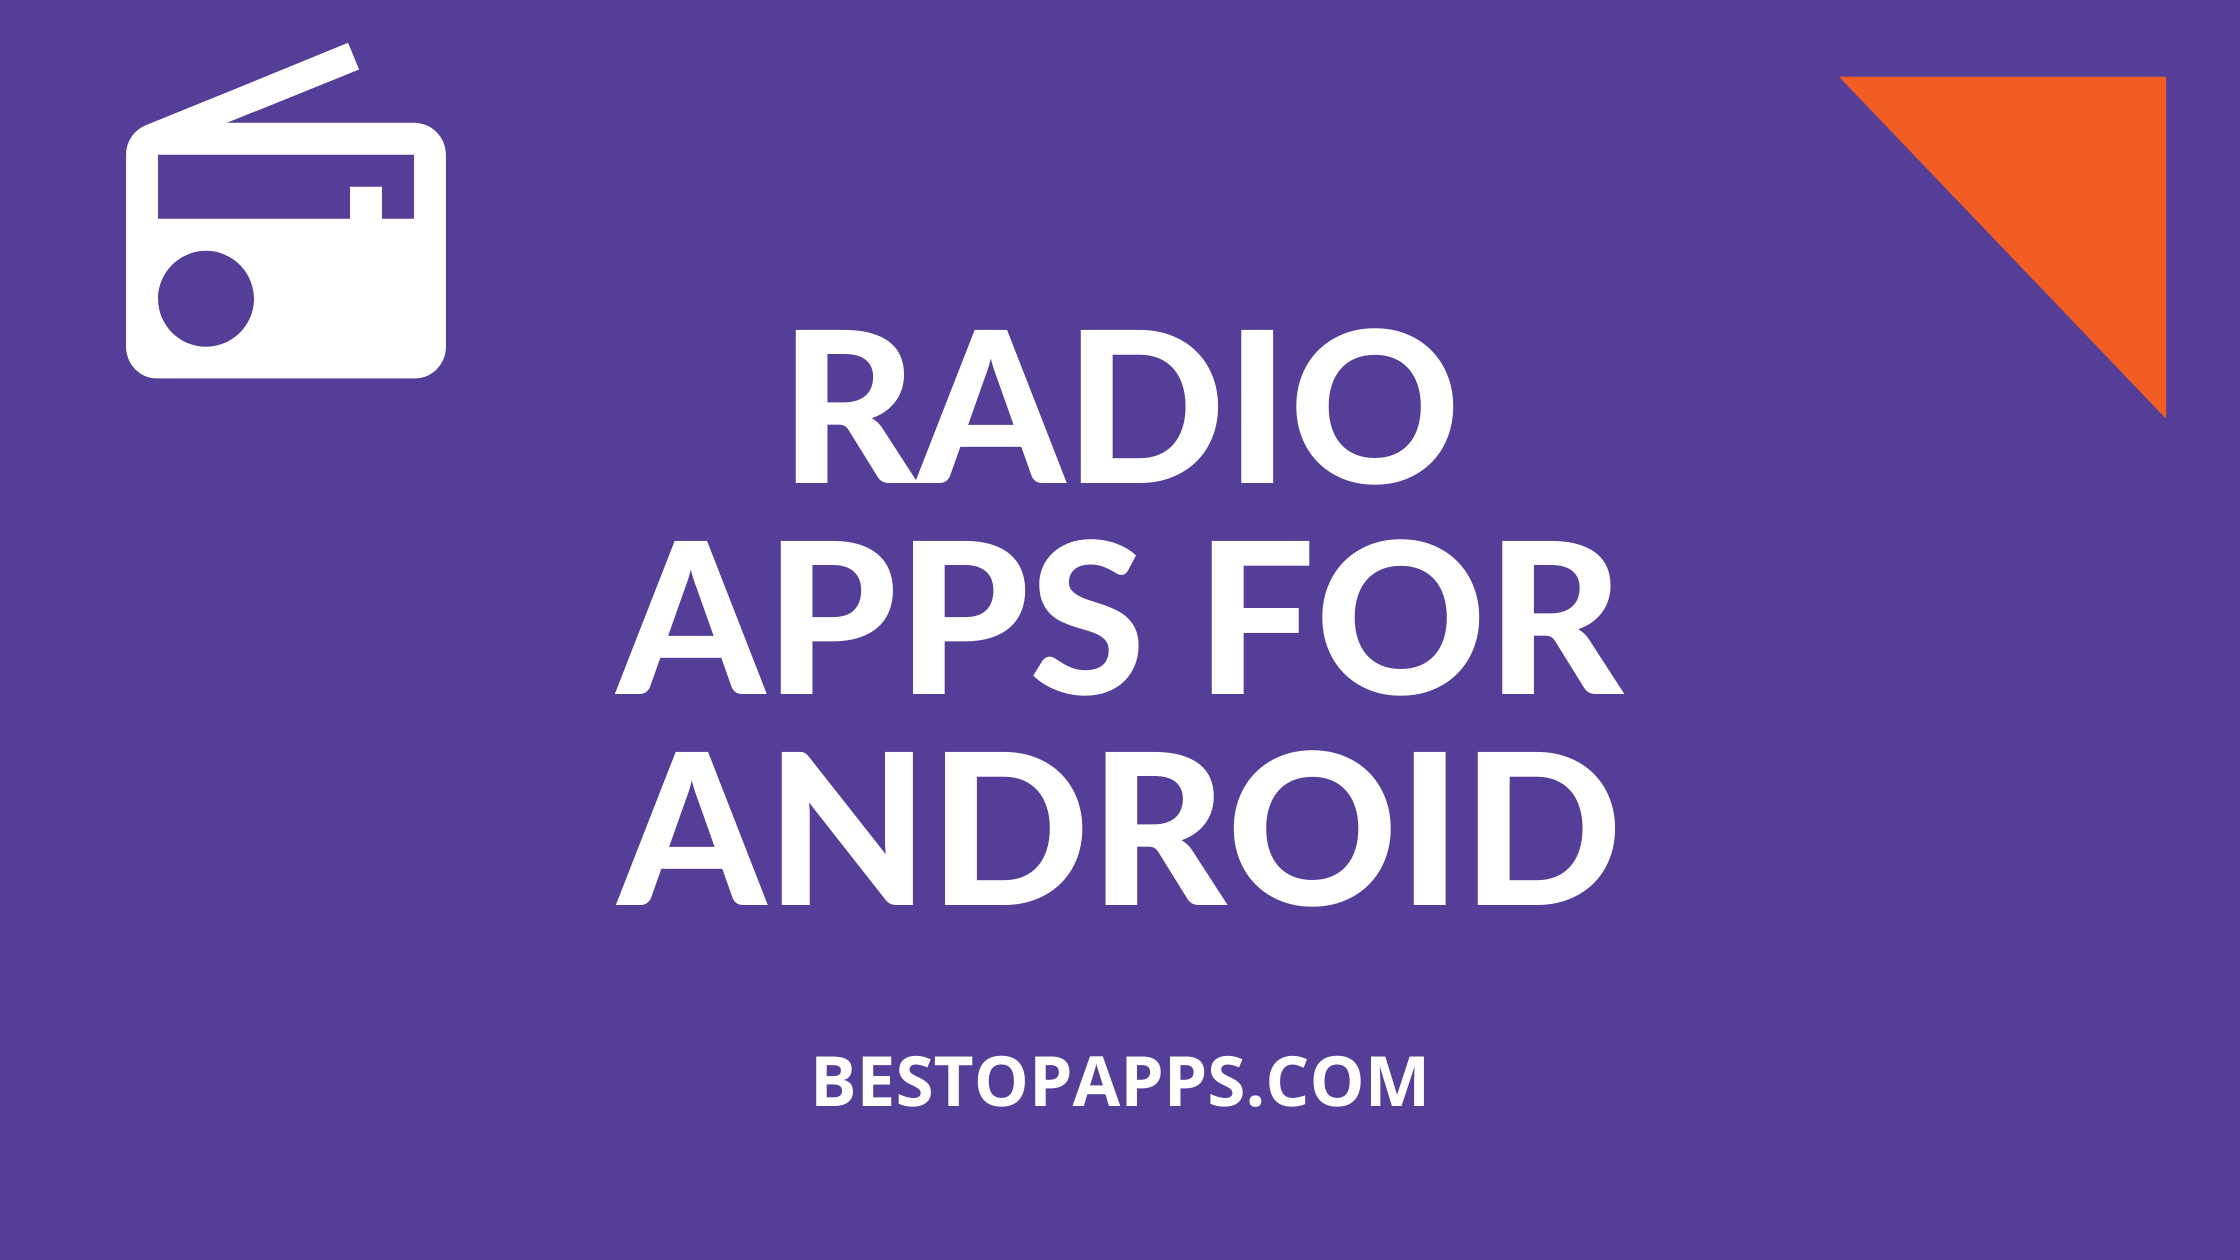 RADIO APPS FOR ANDROID